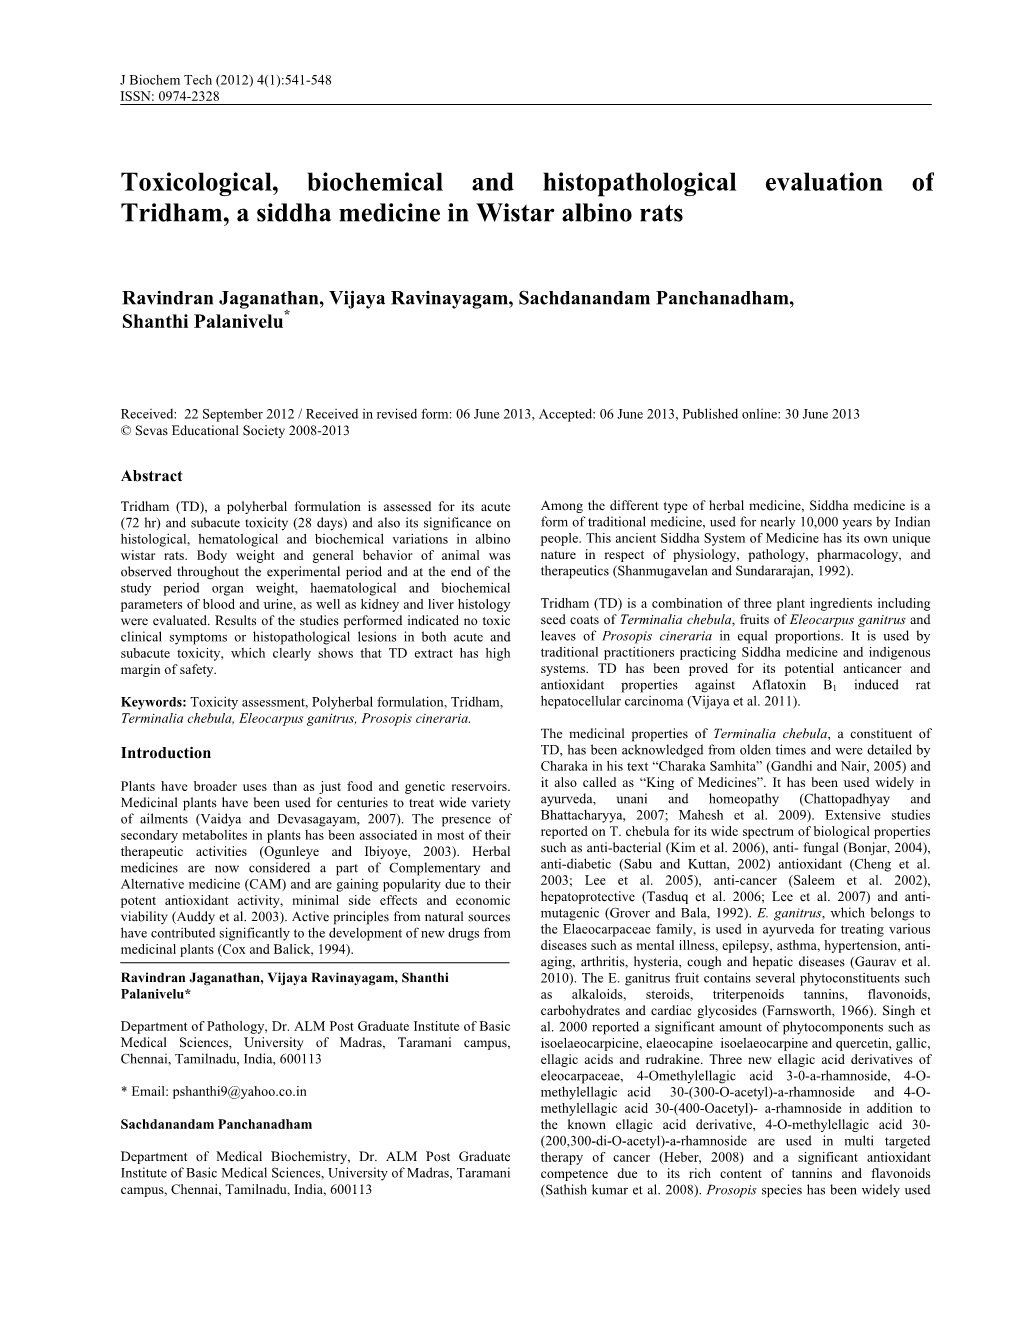 Toxicological, Biochemical and Histopathological Evaluation of Tridham, a Siddha Medicine in Wistar Albino Rats